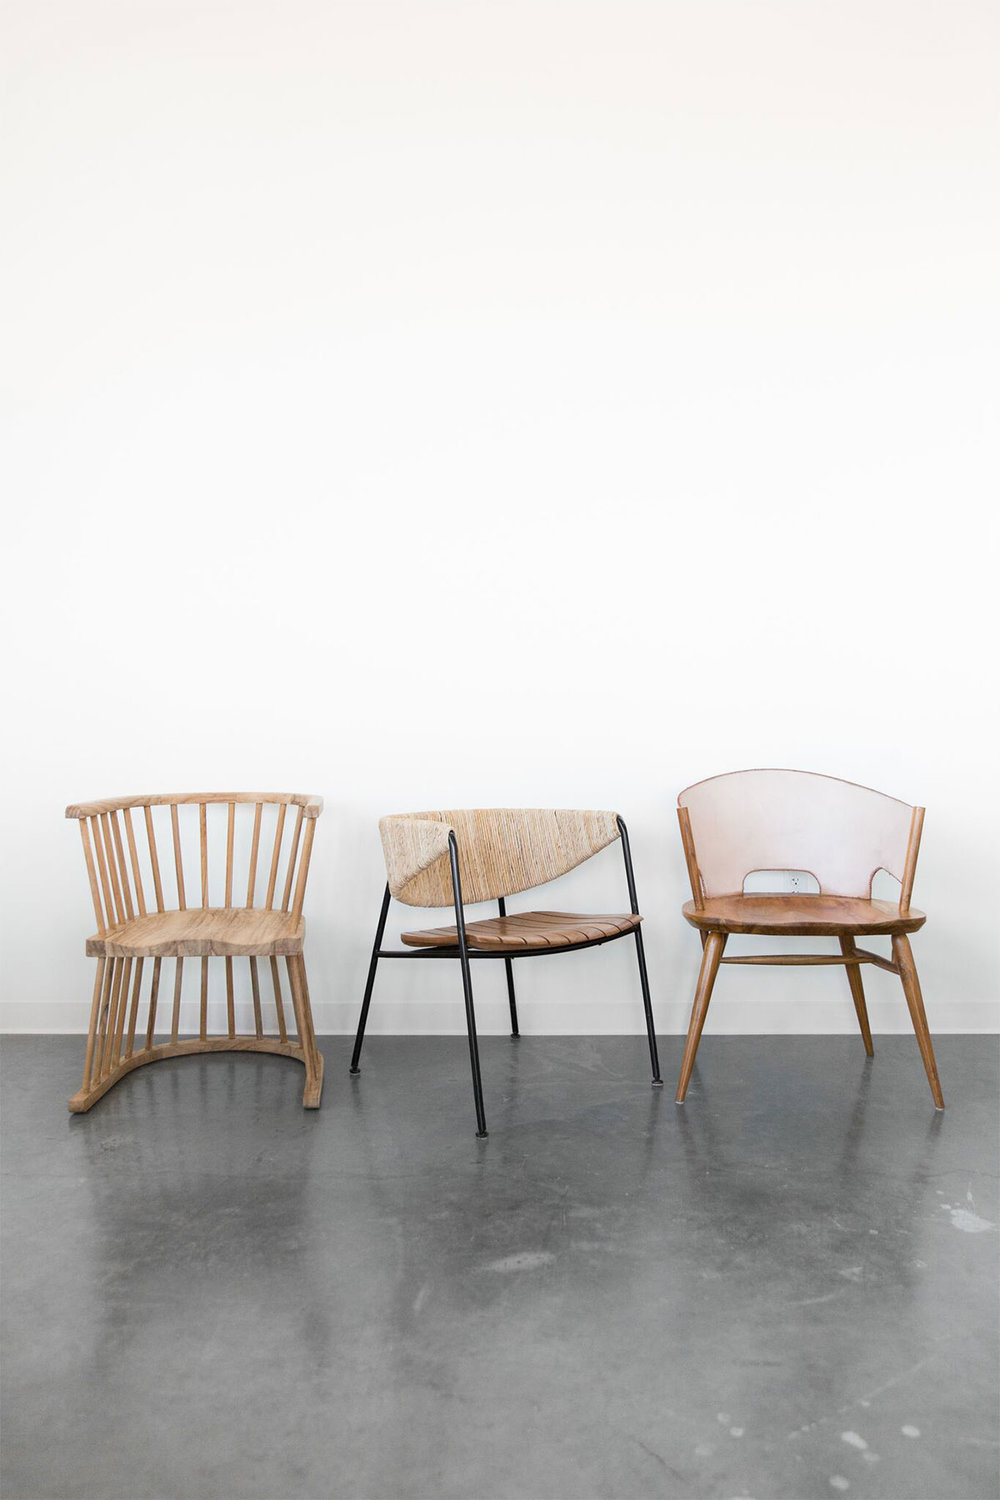 Beautiful natural sculptural chairs from McGee & Co. | mcgeeandco.com